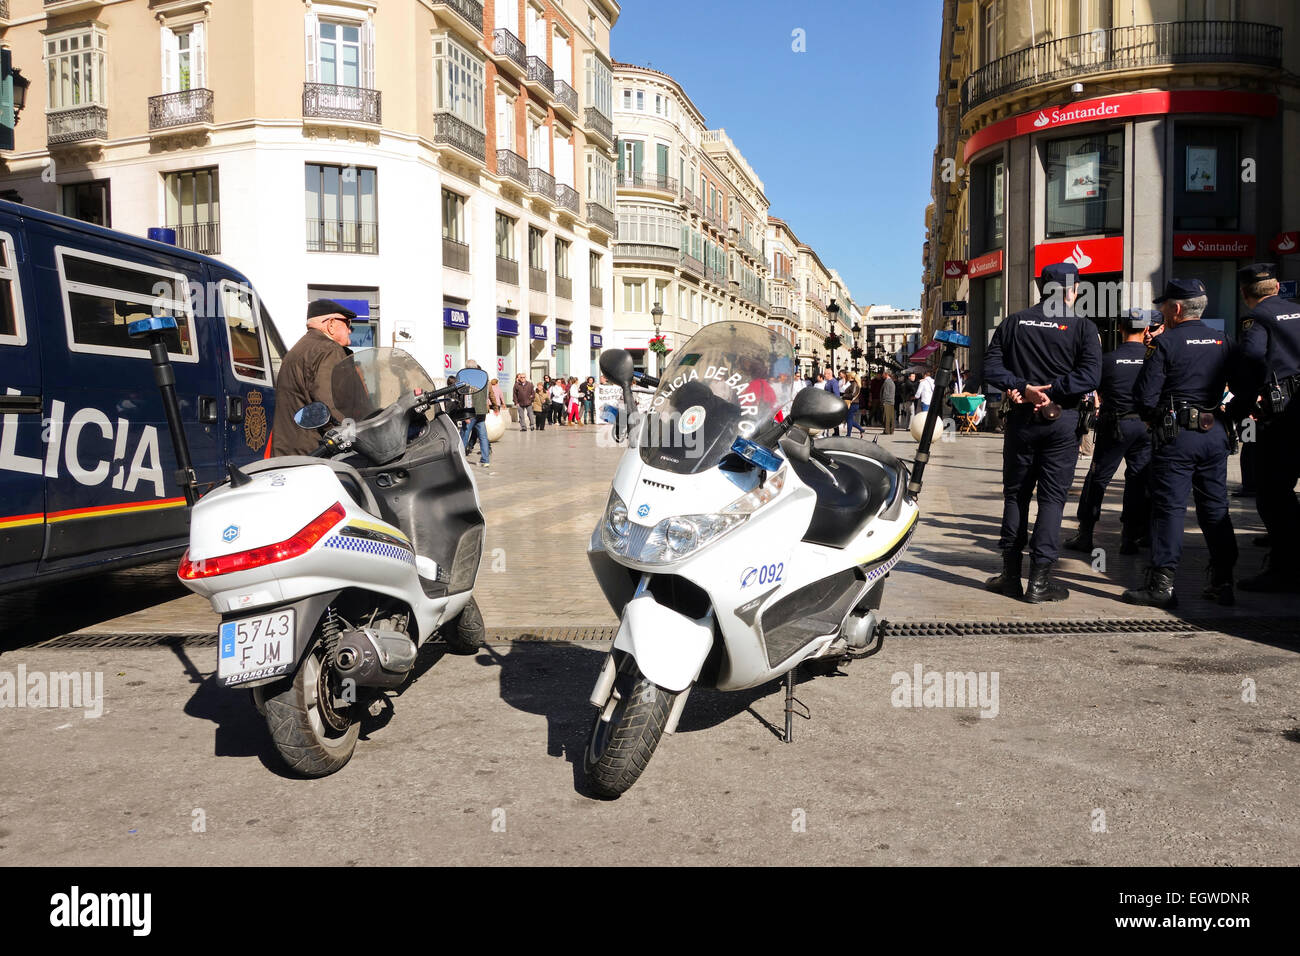 Spanish local police officers patrolling demonstration, street protest, city, Malaga, Andalusia, Spain. Stock Photo